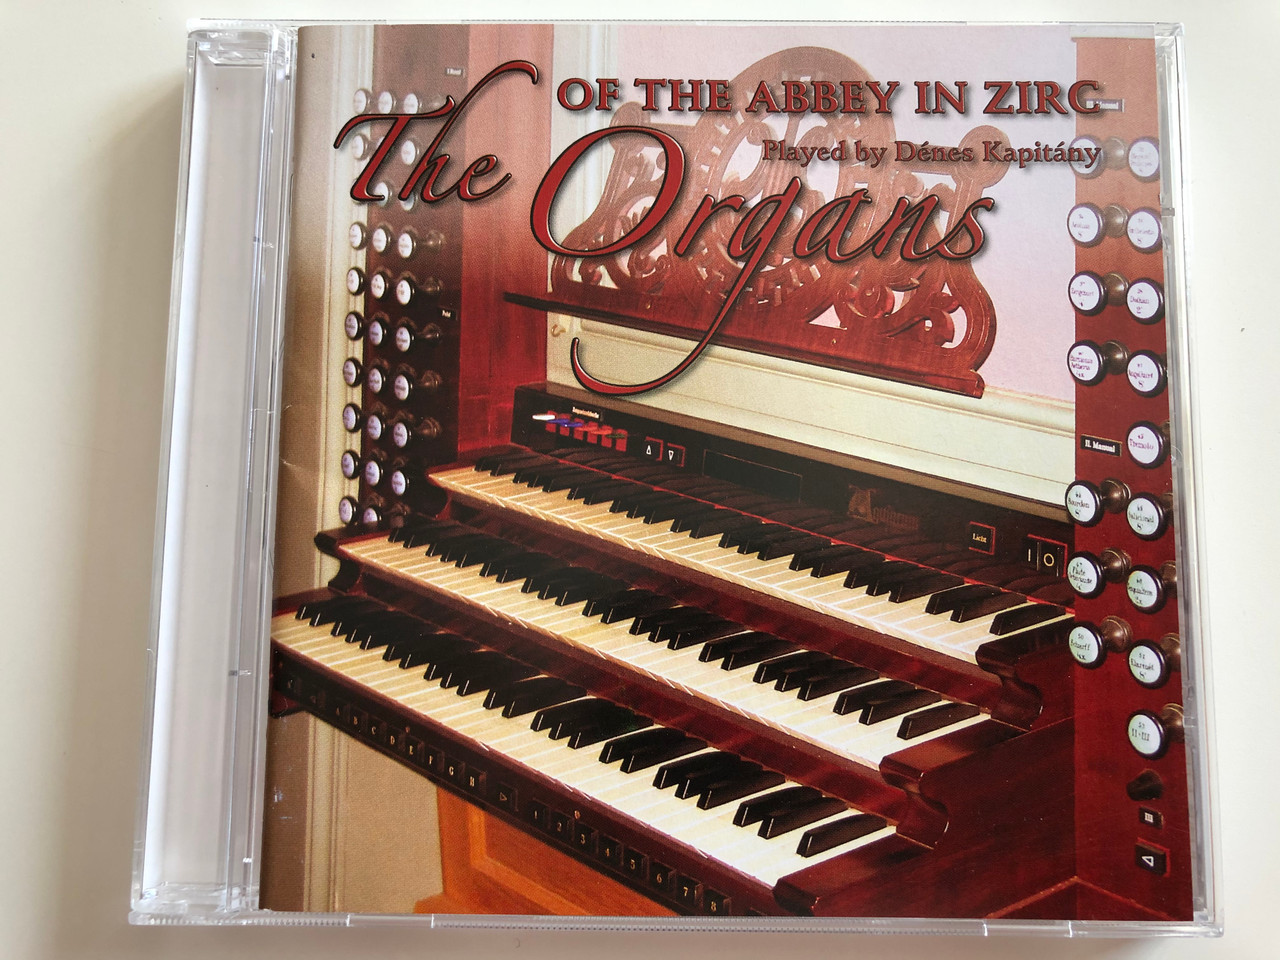 The Organs of the Abbey In Zirc / Playes by Denes Kapitany / Audio CD 2006  / 2006/ORG - bibleinmylanguage